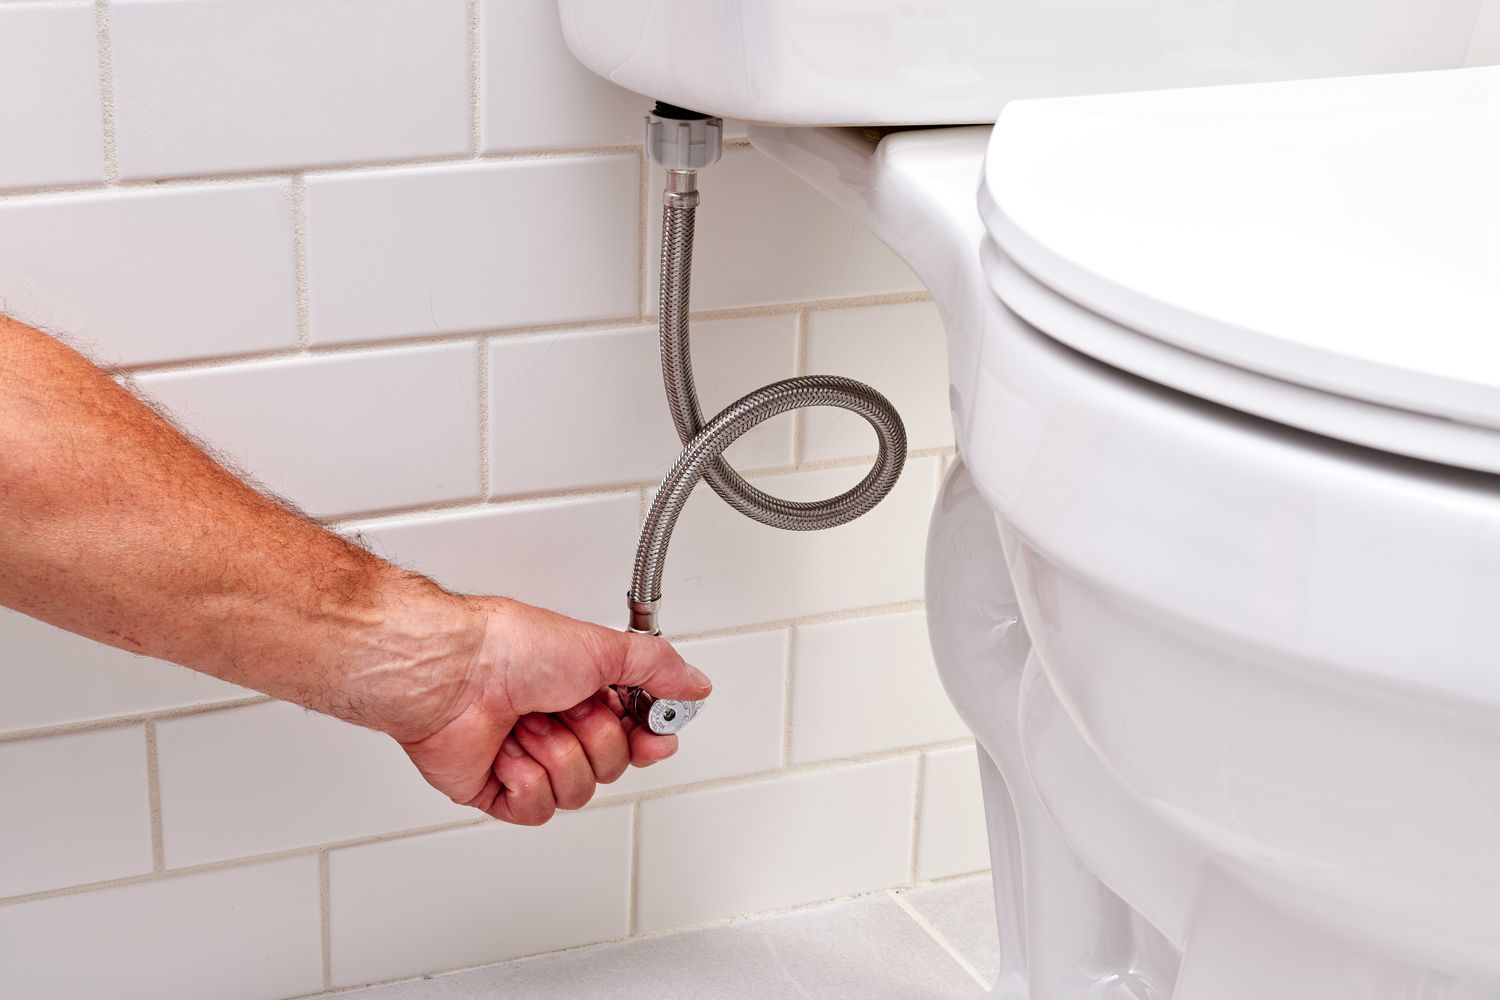 Ways to Prevent Leaking Toilet from the Base